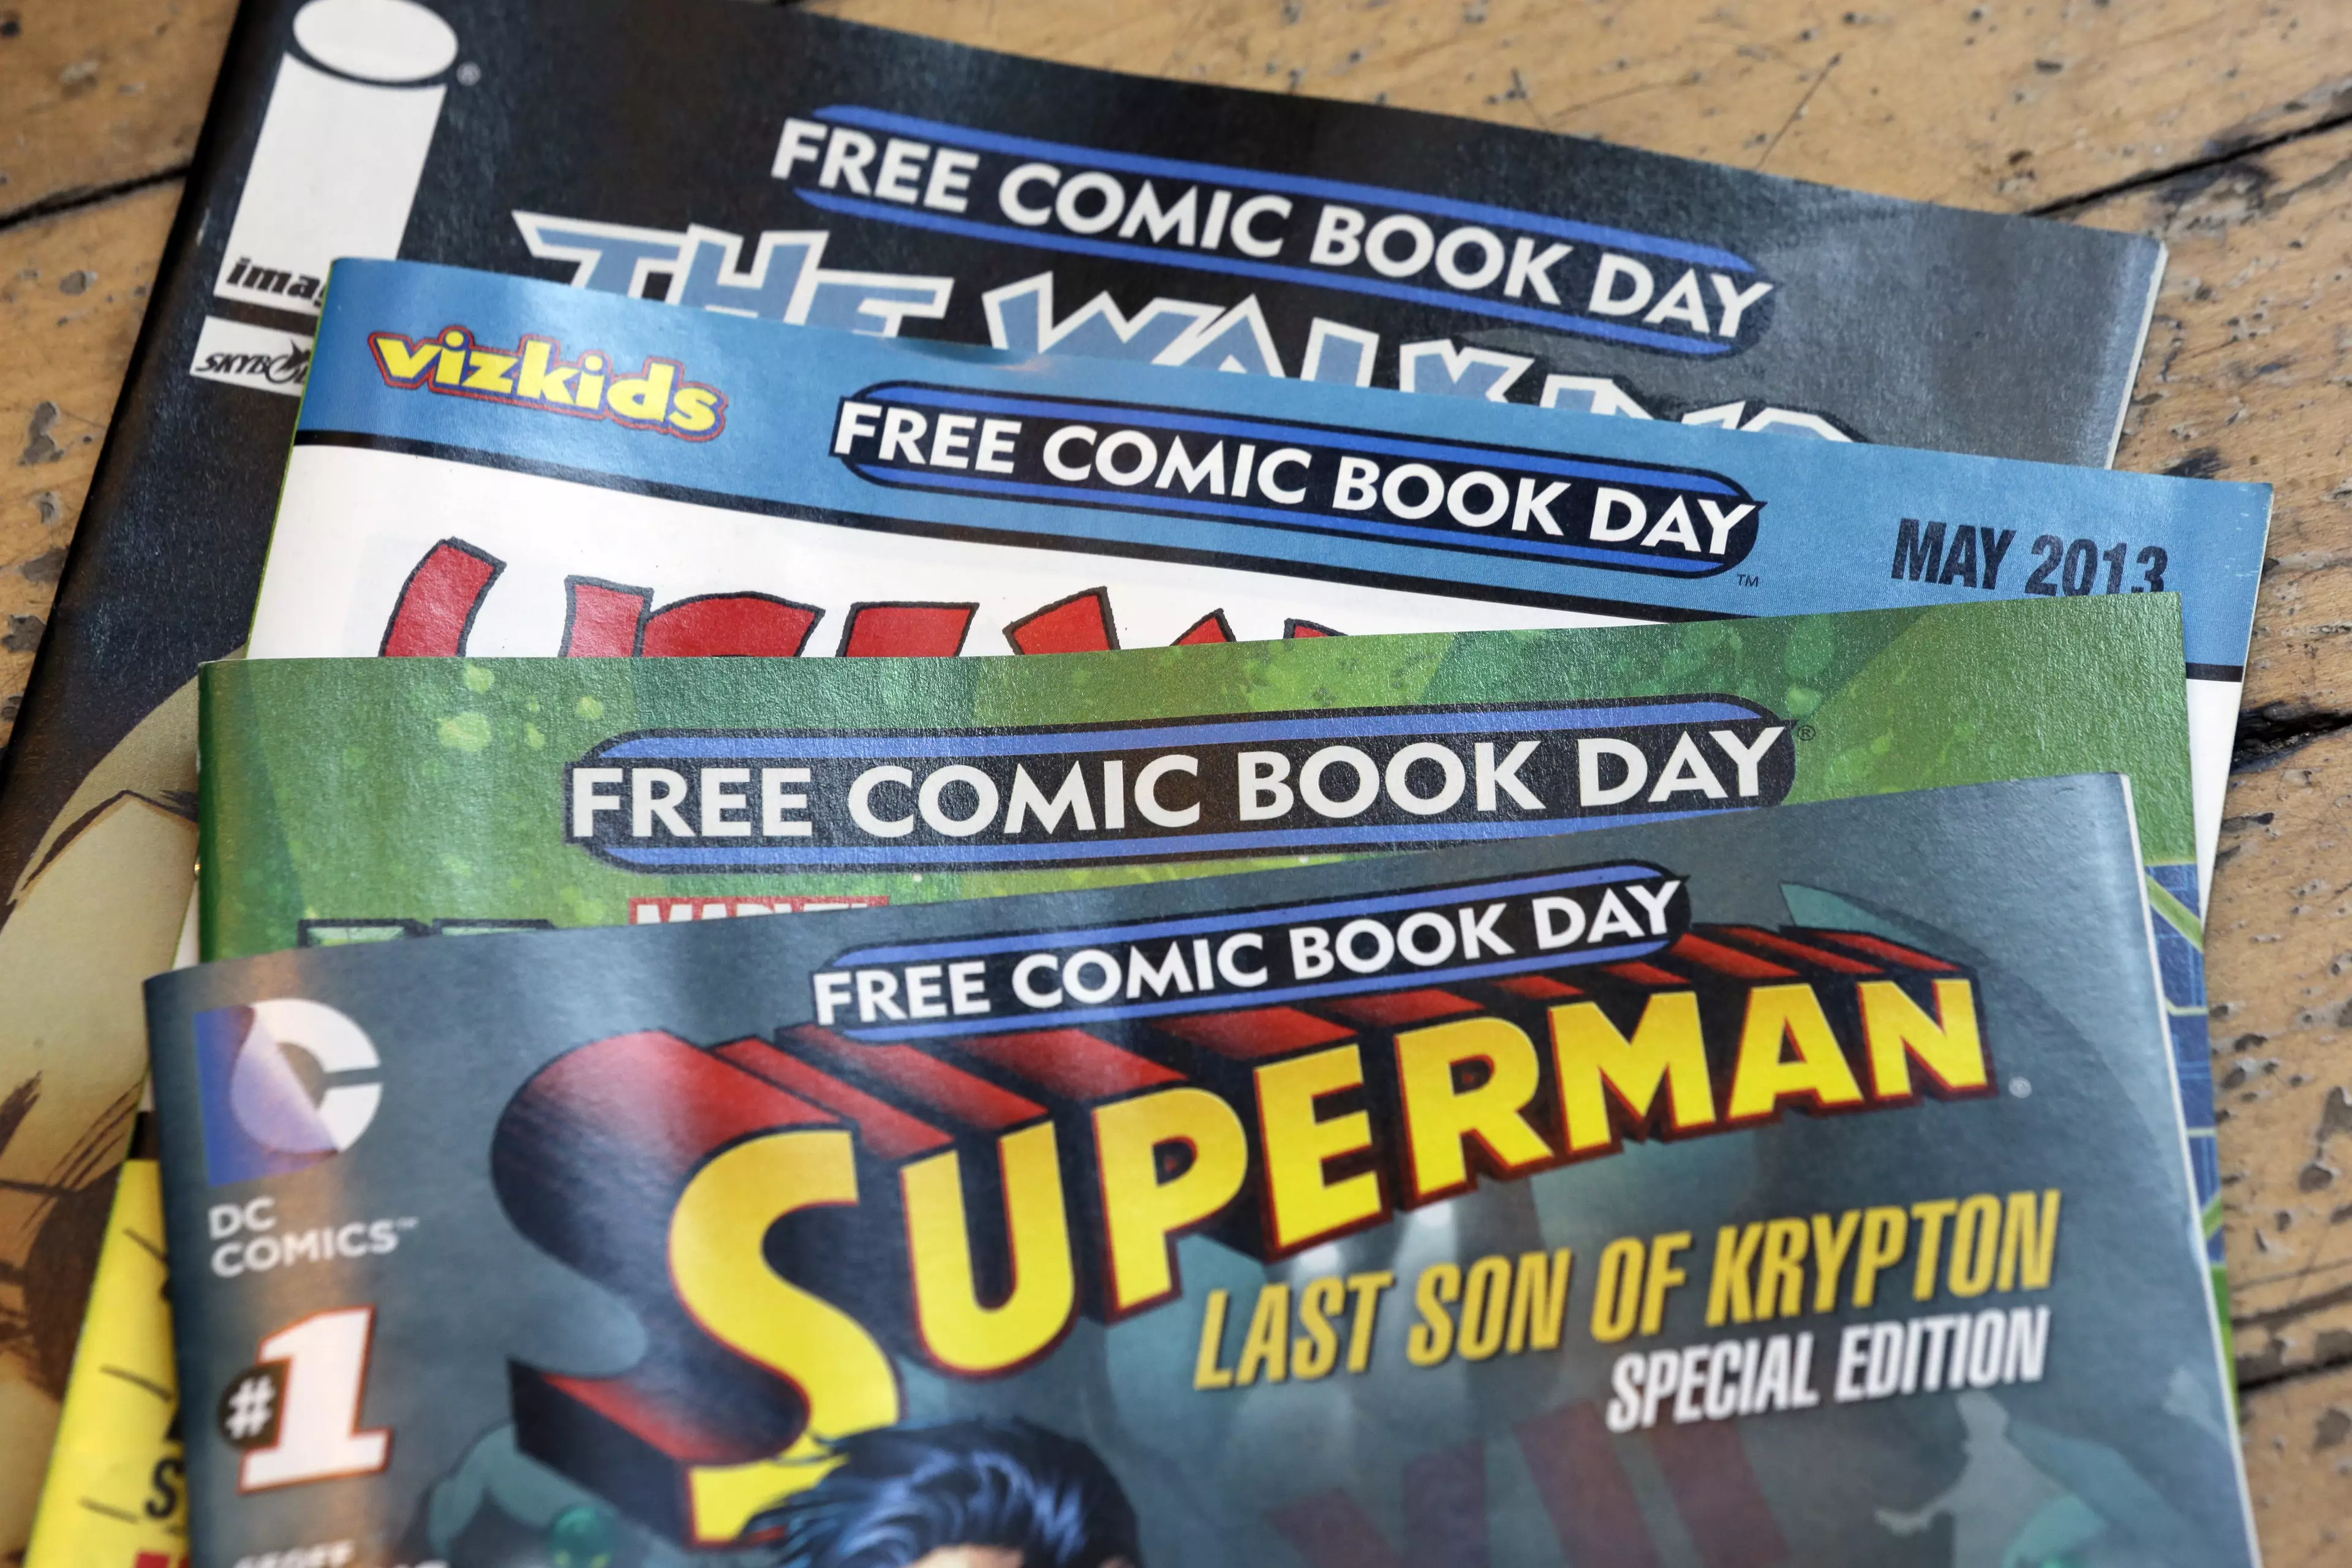 A School Has Banned Homework And Told Kids To Read Comics Instead